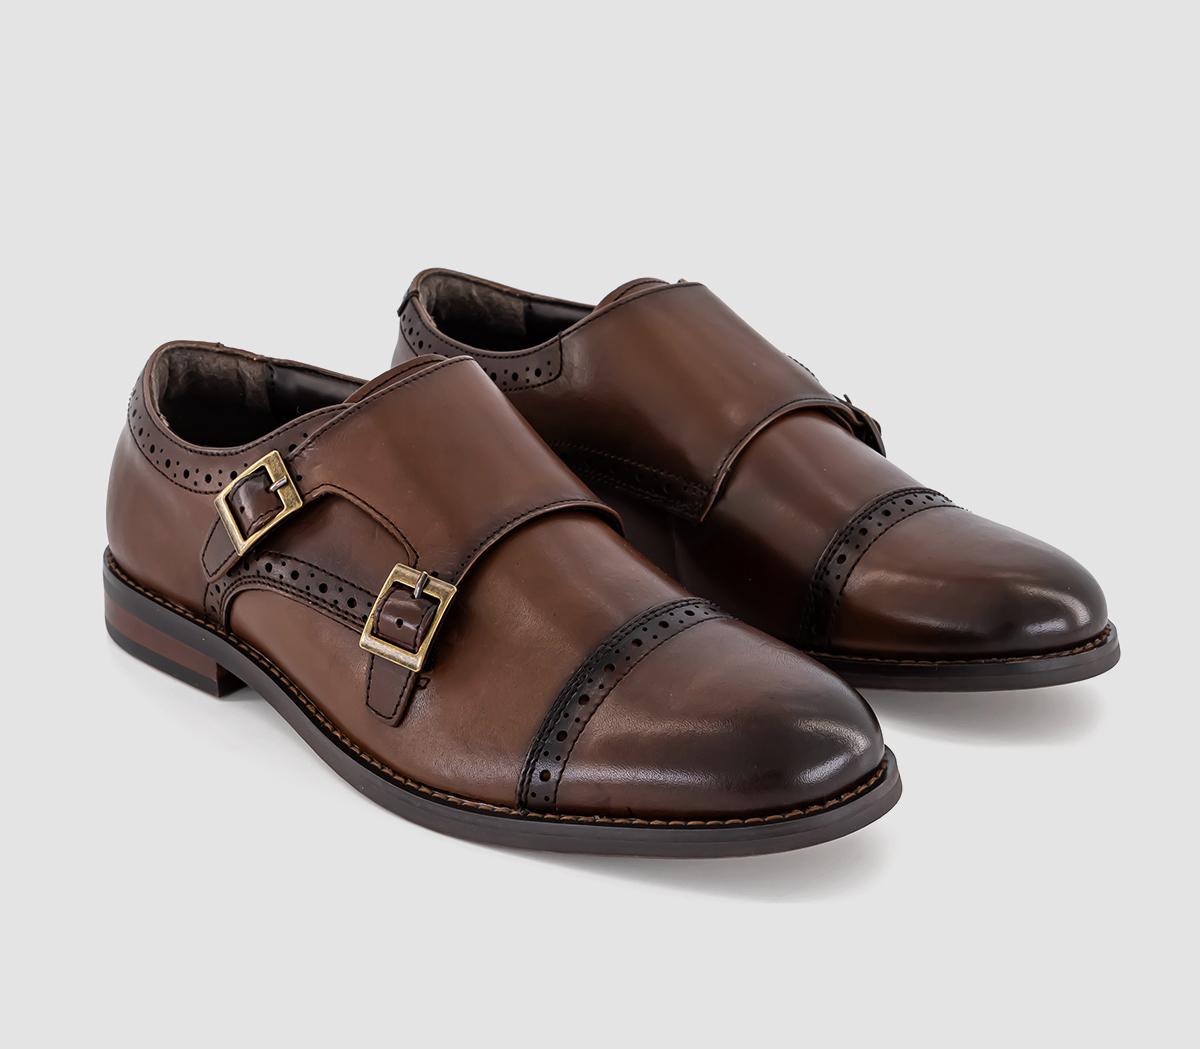 OFFICE Mens Myles Double Strap Monk Shoes Brown Leather, 10